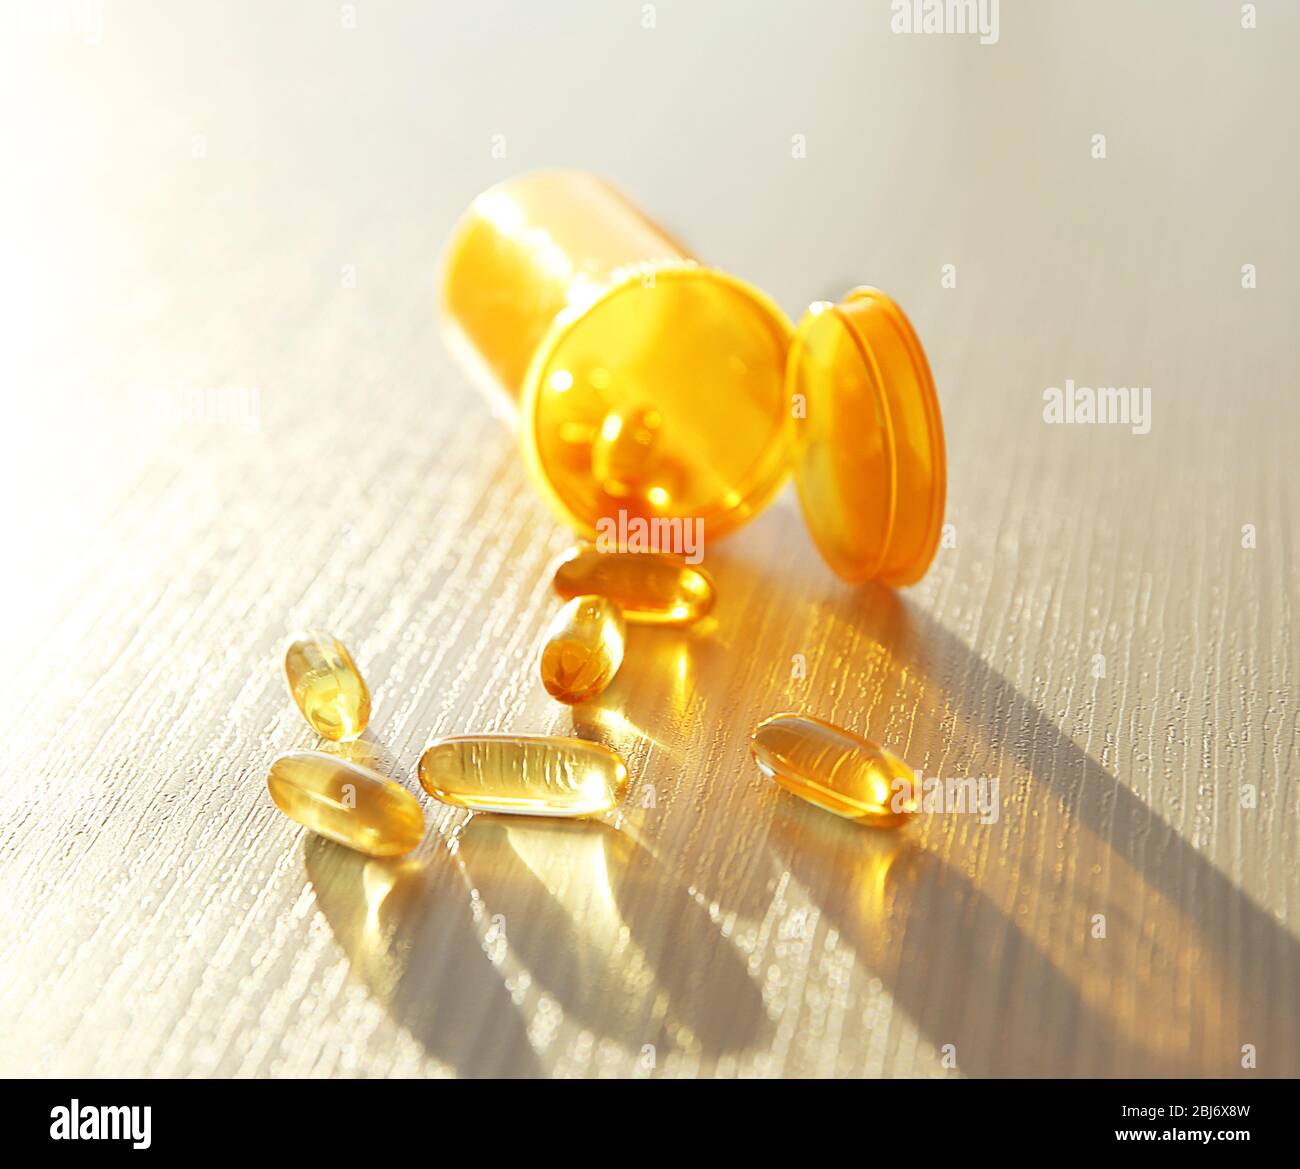 Download Yellow Pill Bottle High Resolution Stock Photography And Images Alamy PSD Mockup Templates